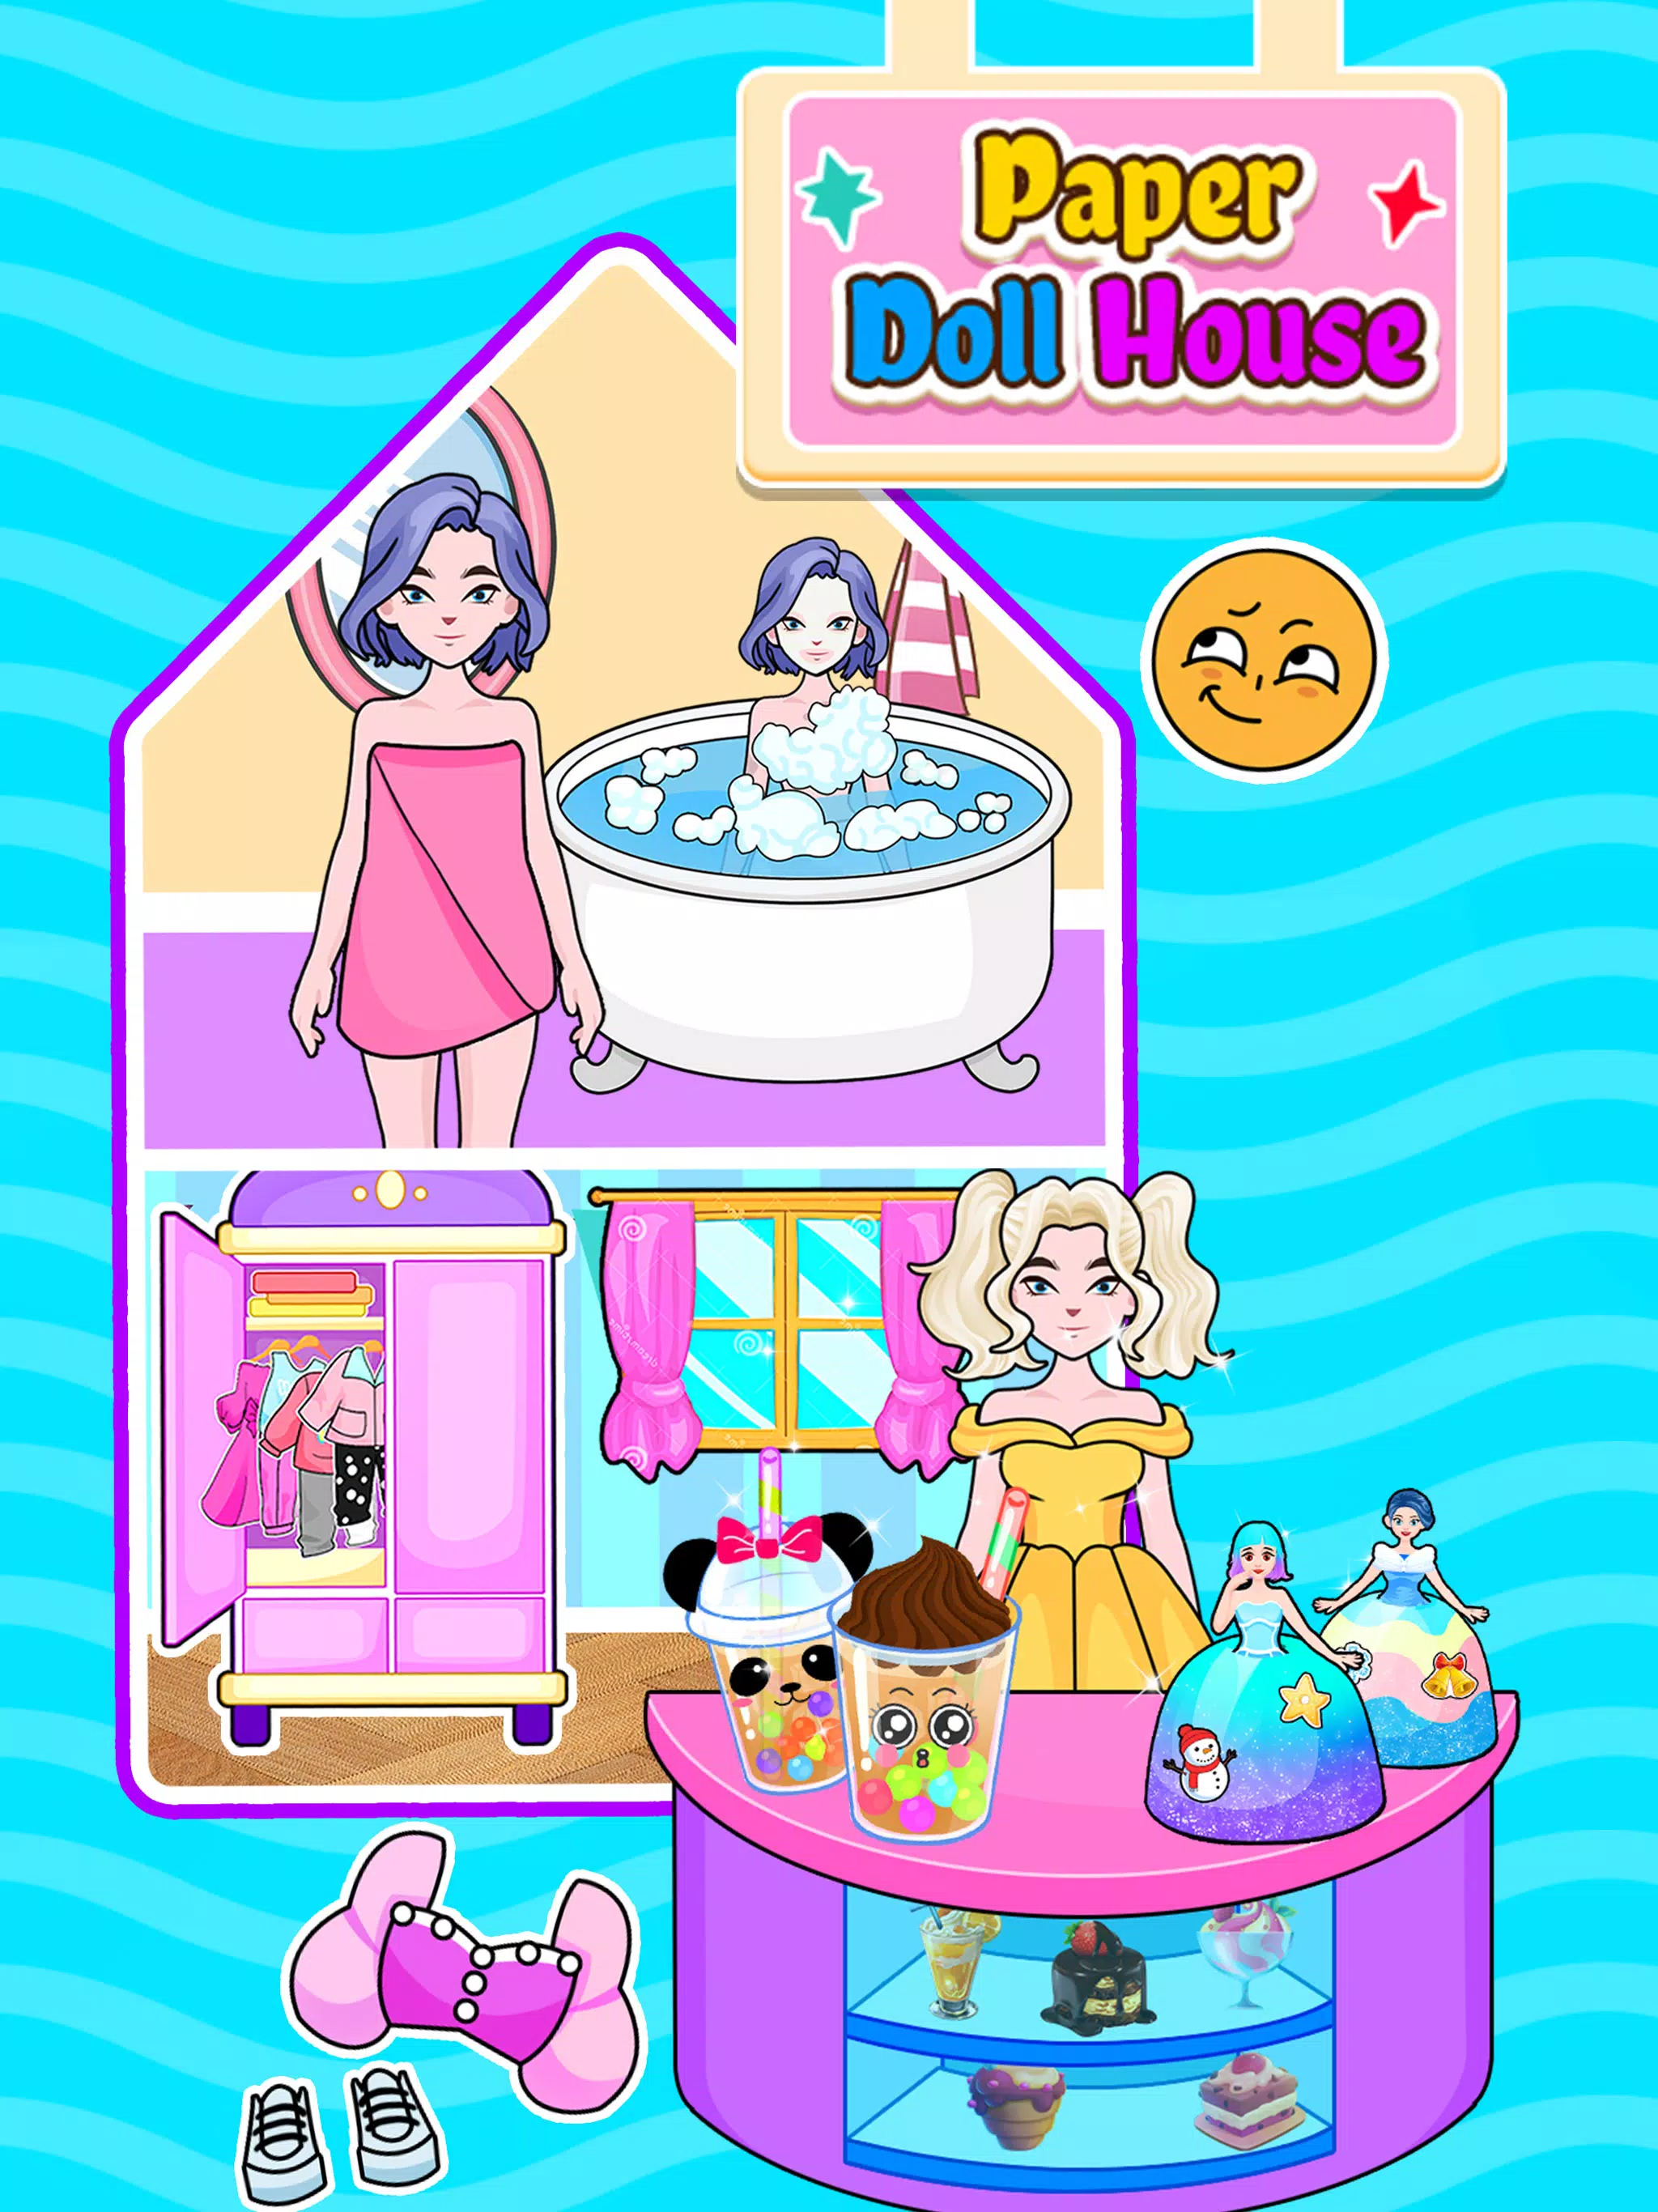 Paper Doll + Paper Doll House